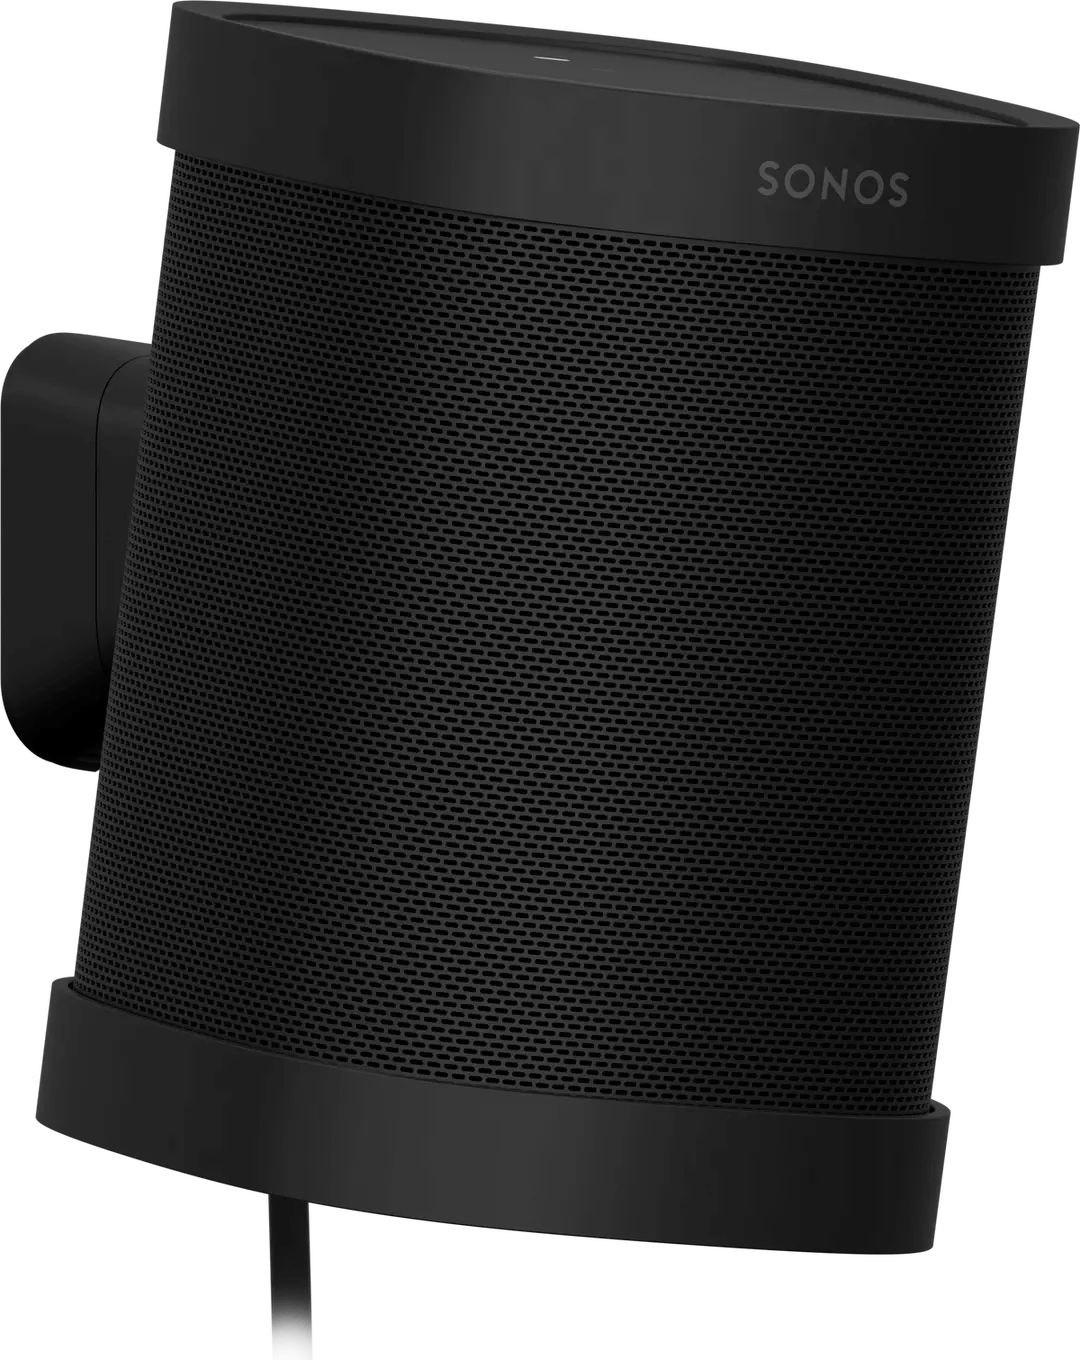 Sonos - Wall Mount for One